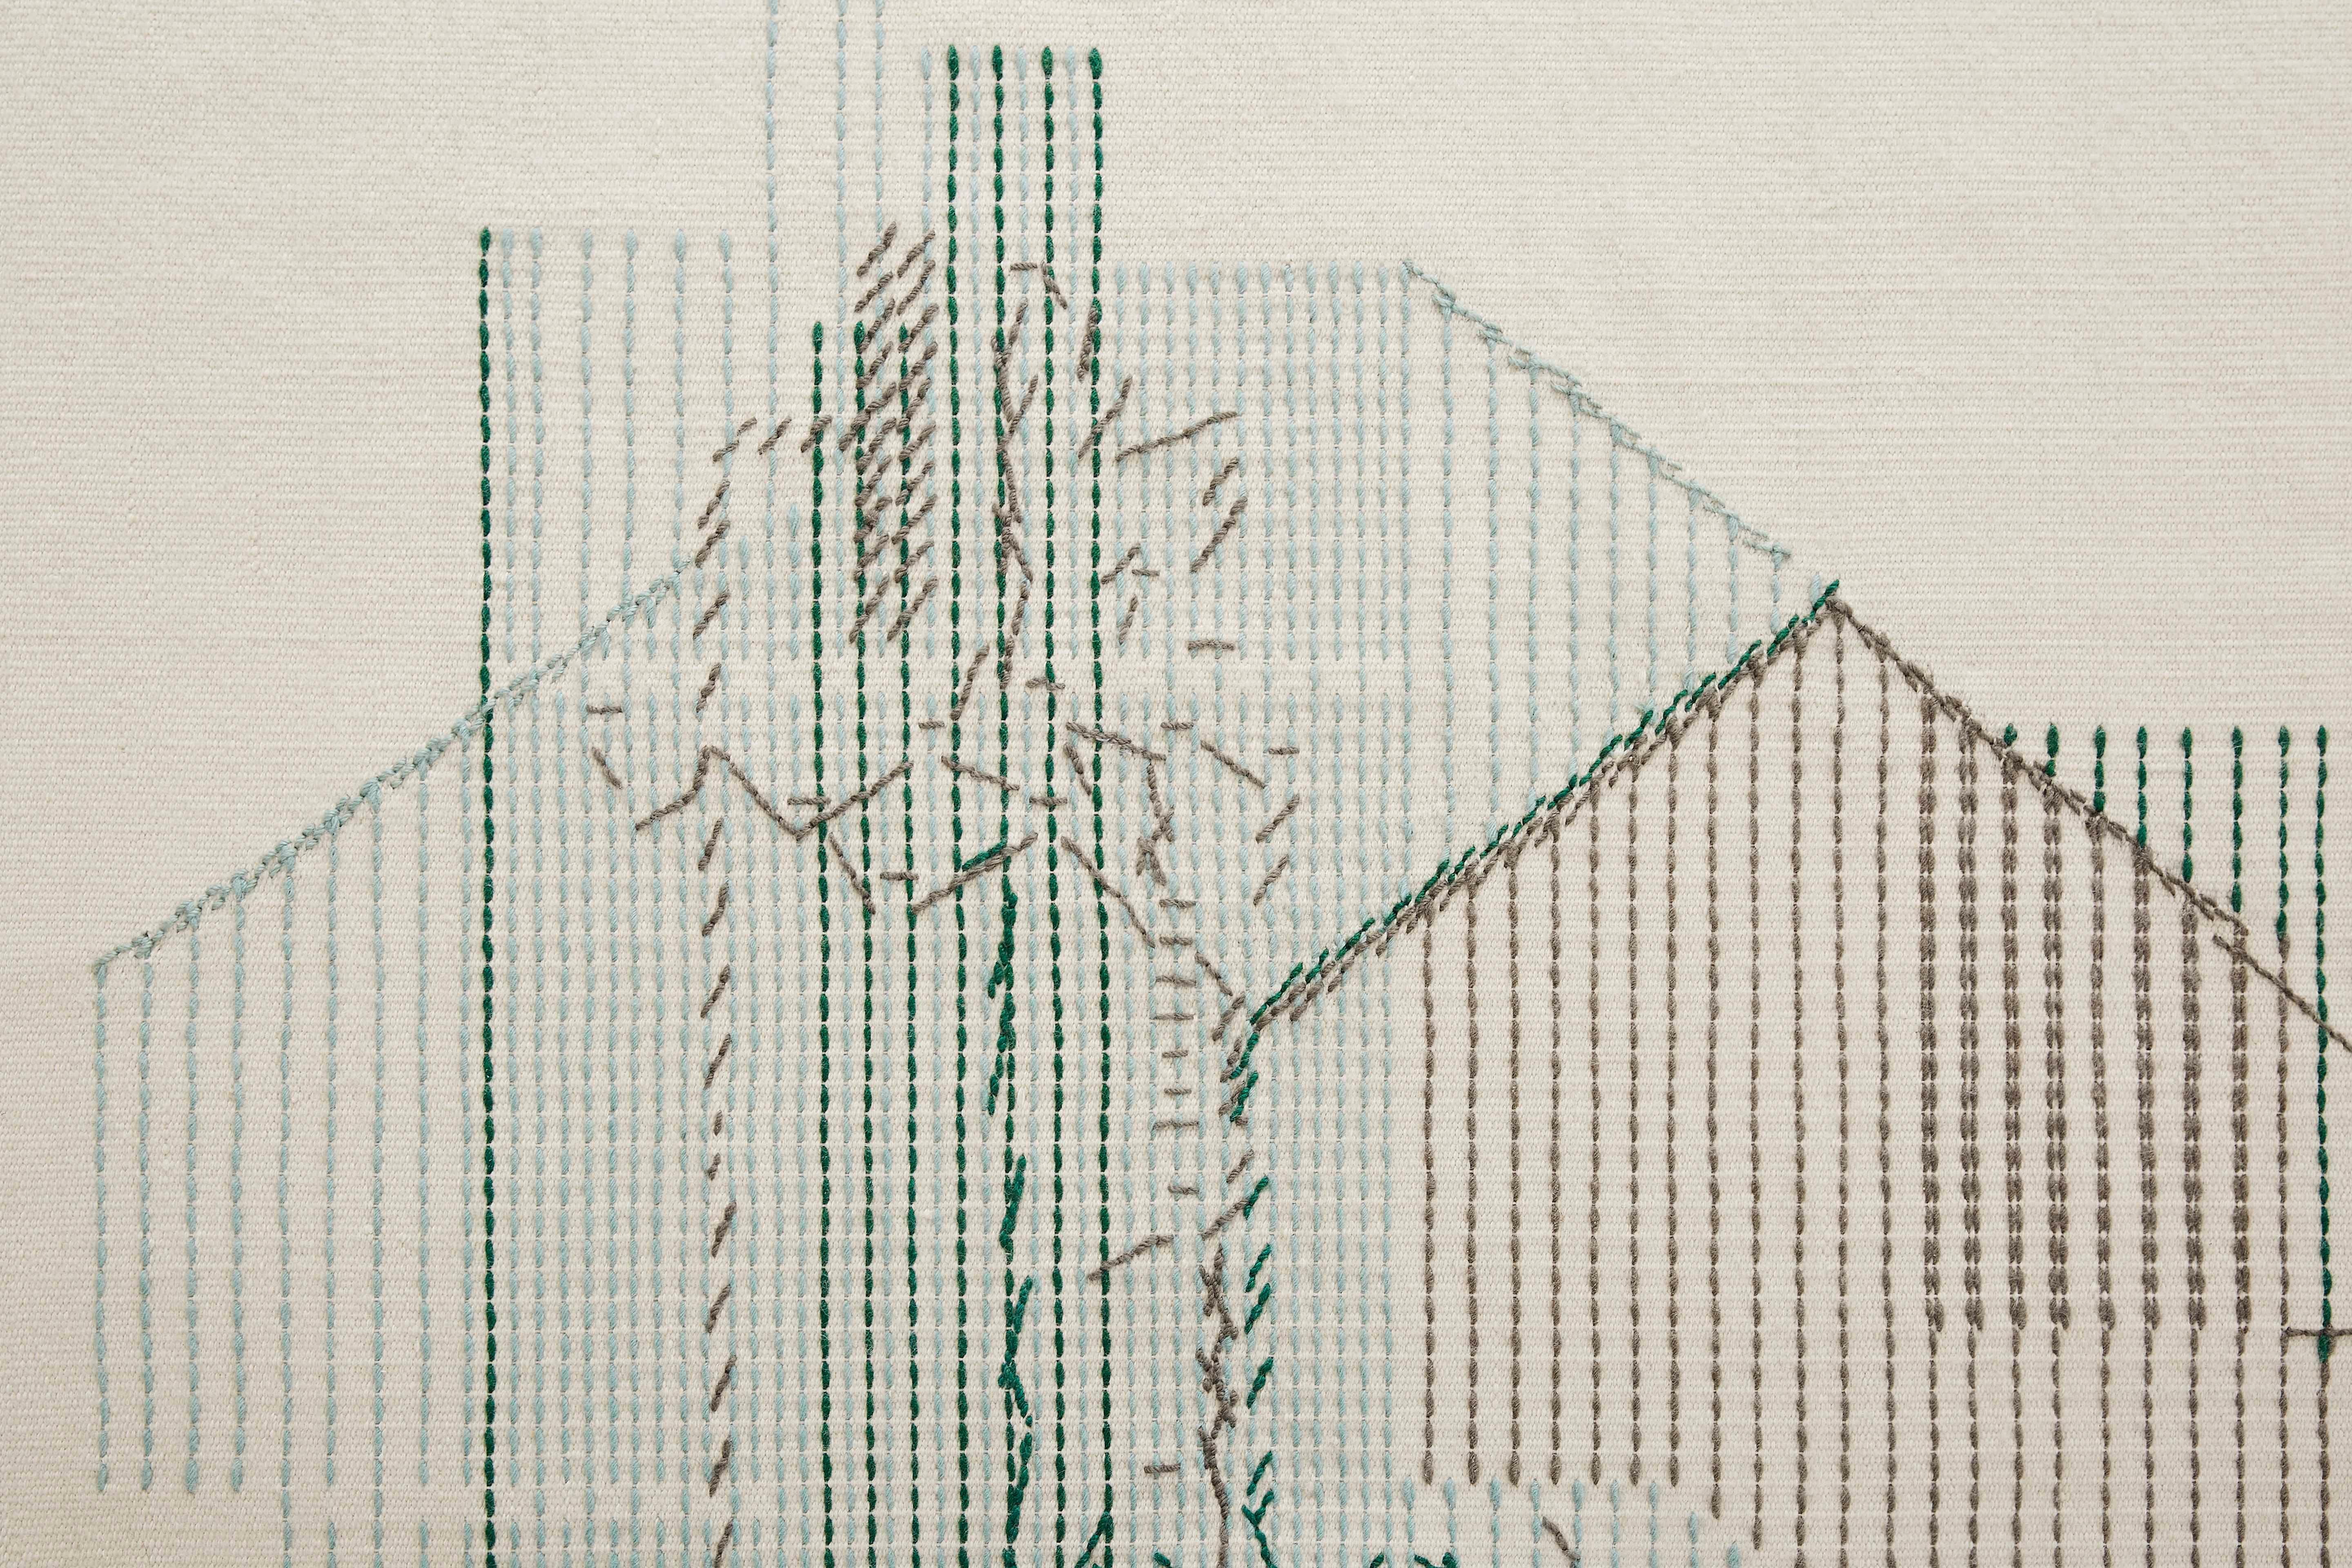 Learning about embroidery – GAN’s incredible craft and strength – Raw-Edges found themselves drawn to the aesthetics on its reverse side. The ‘back stitch’ has an unintentional hidden beauty to it, that one might so easily miss. Their aim was to